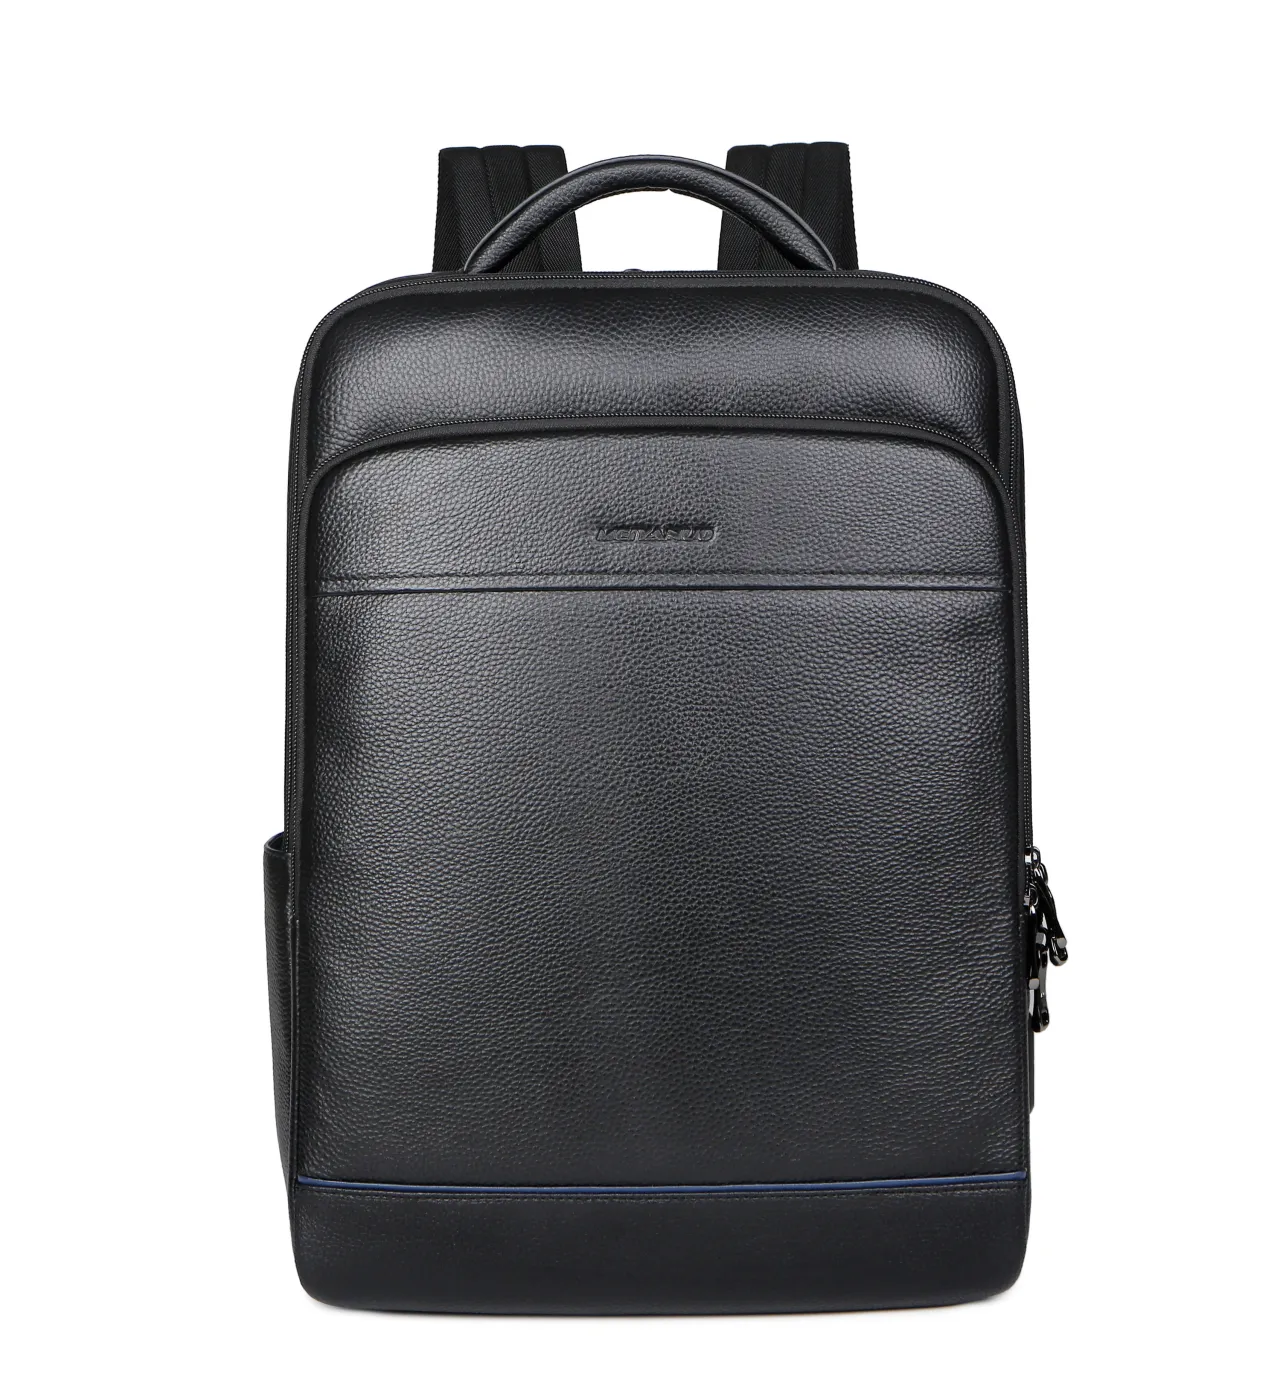 Hot Sale Waterproof Large Capacity True Cow Leather Laptop Backpack For Men